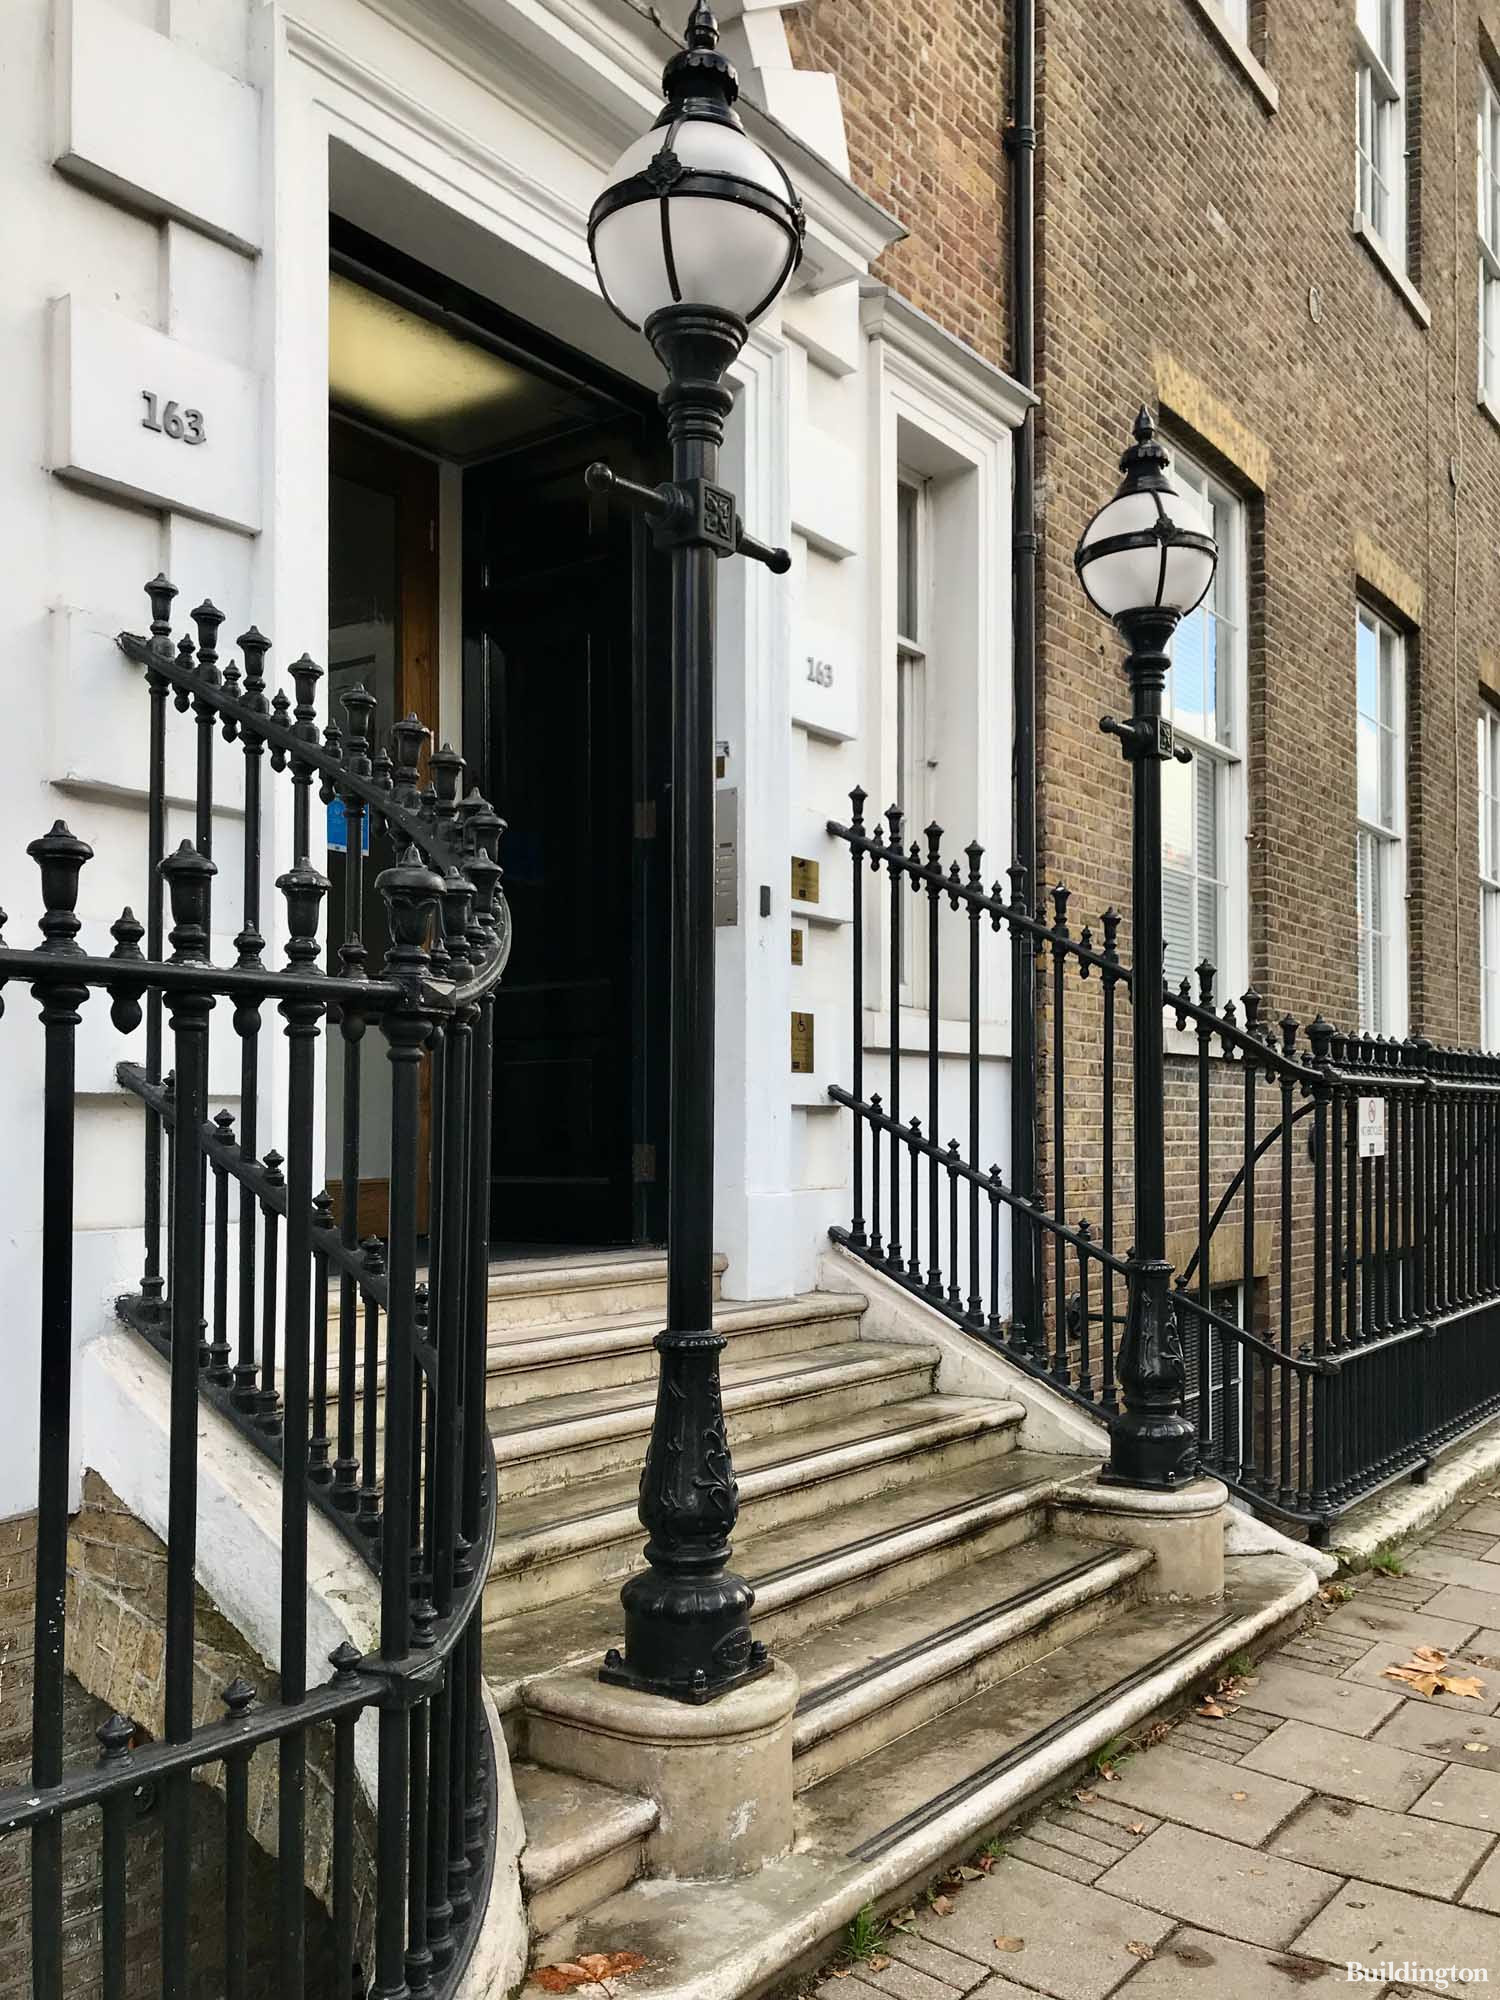 Entrance to No. 163 at 163-203 Eversholt Street in Euston, London NW1.